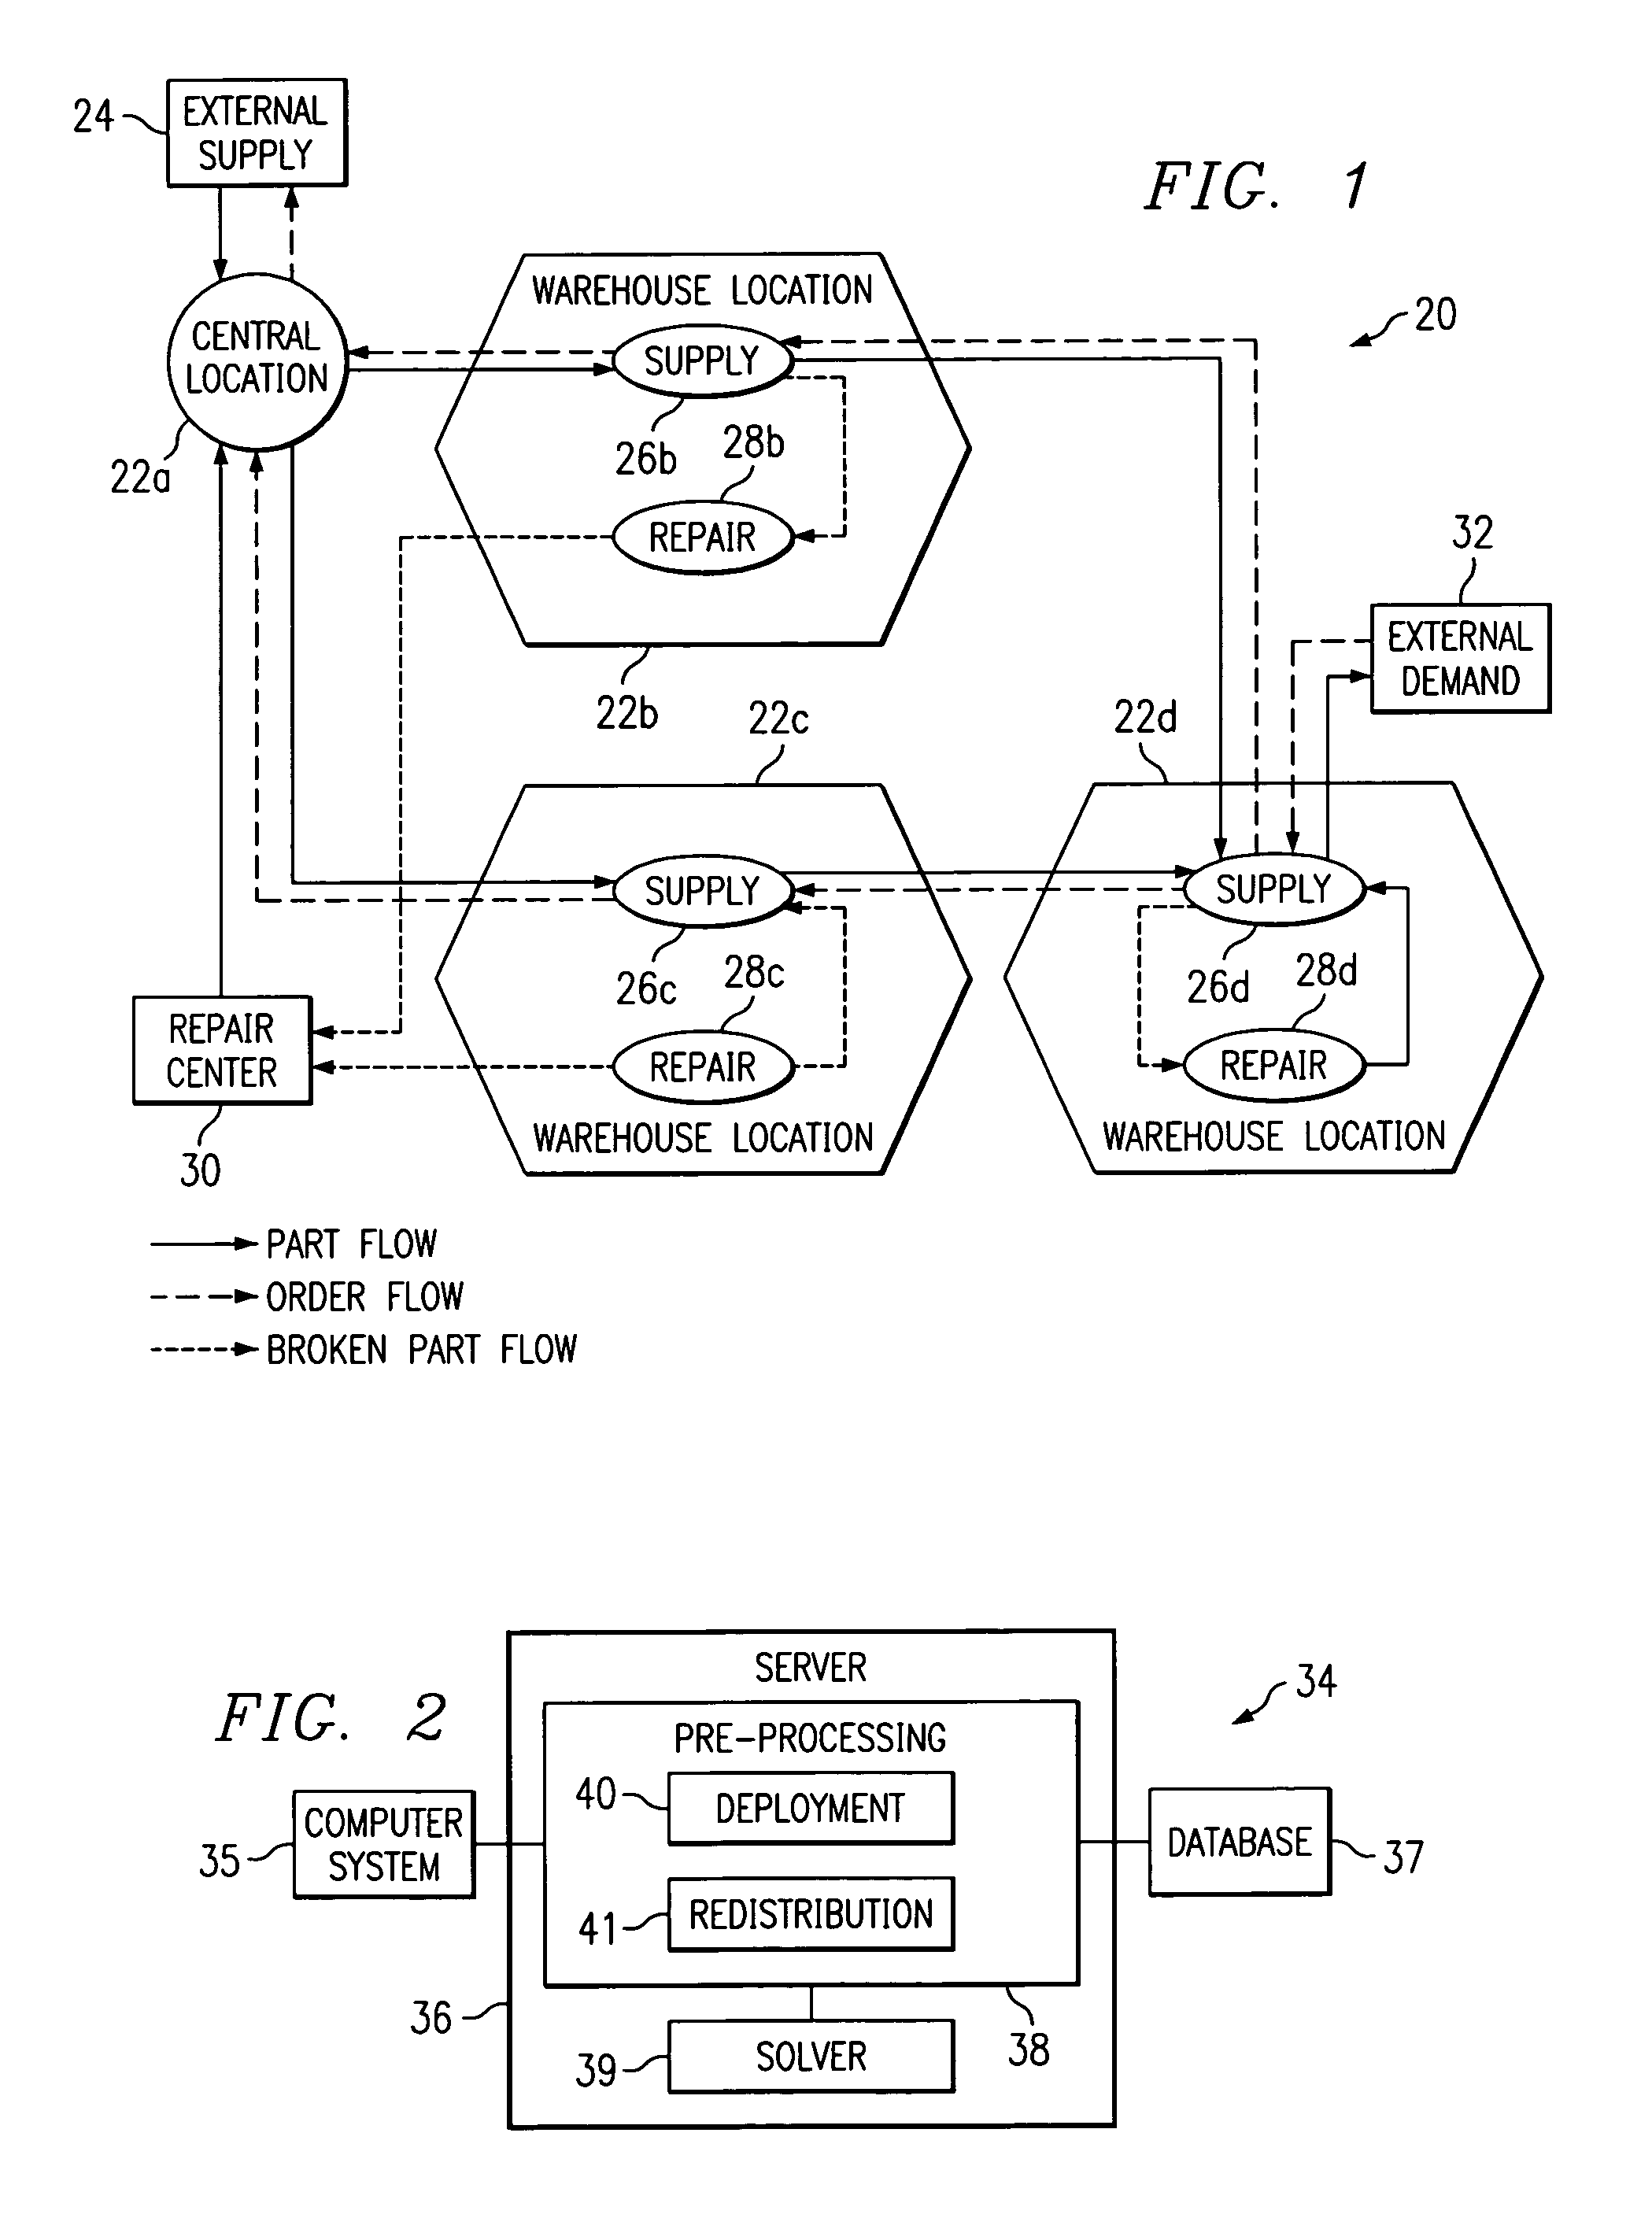 Redistribution of parts in a distribution network